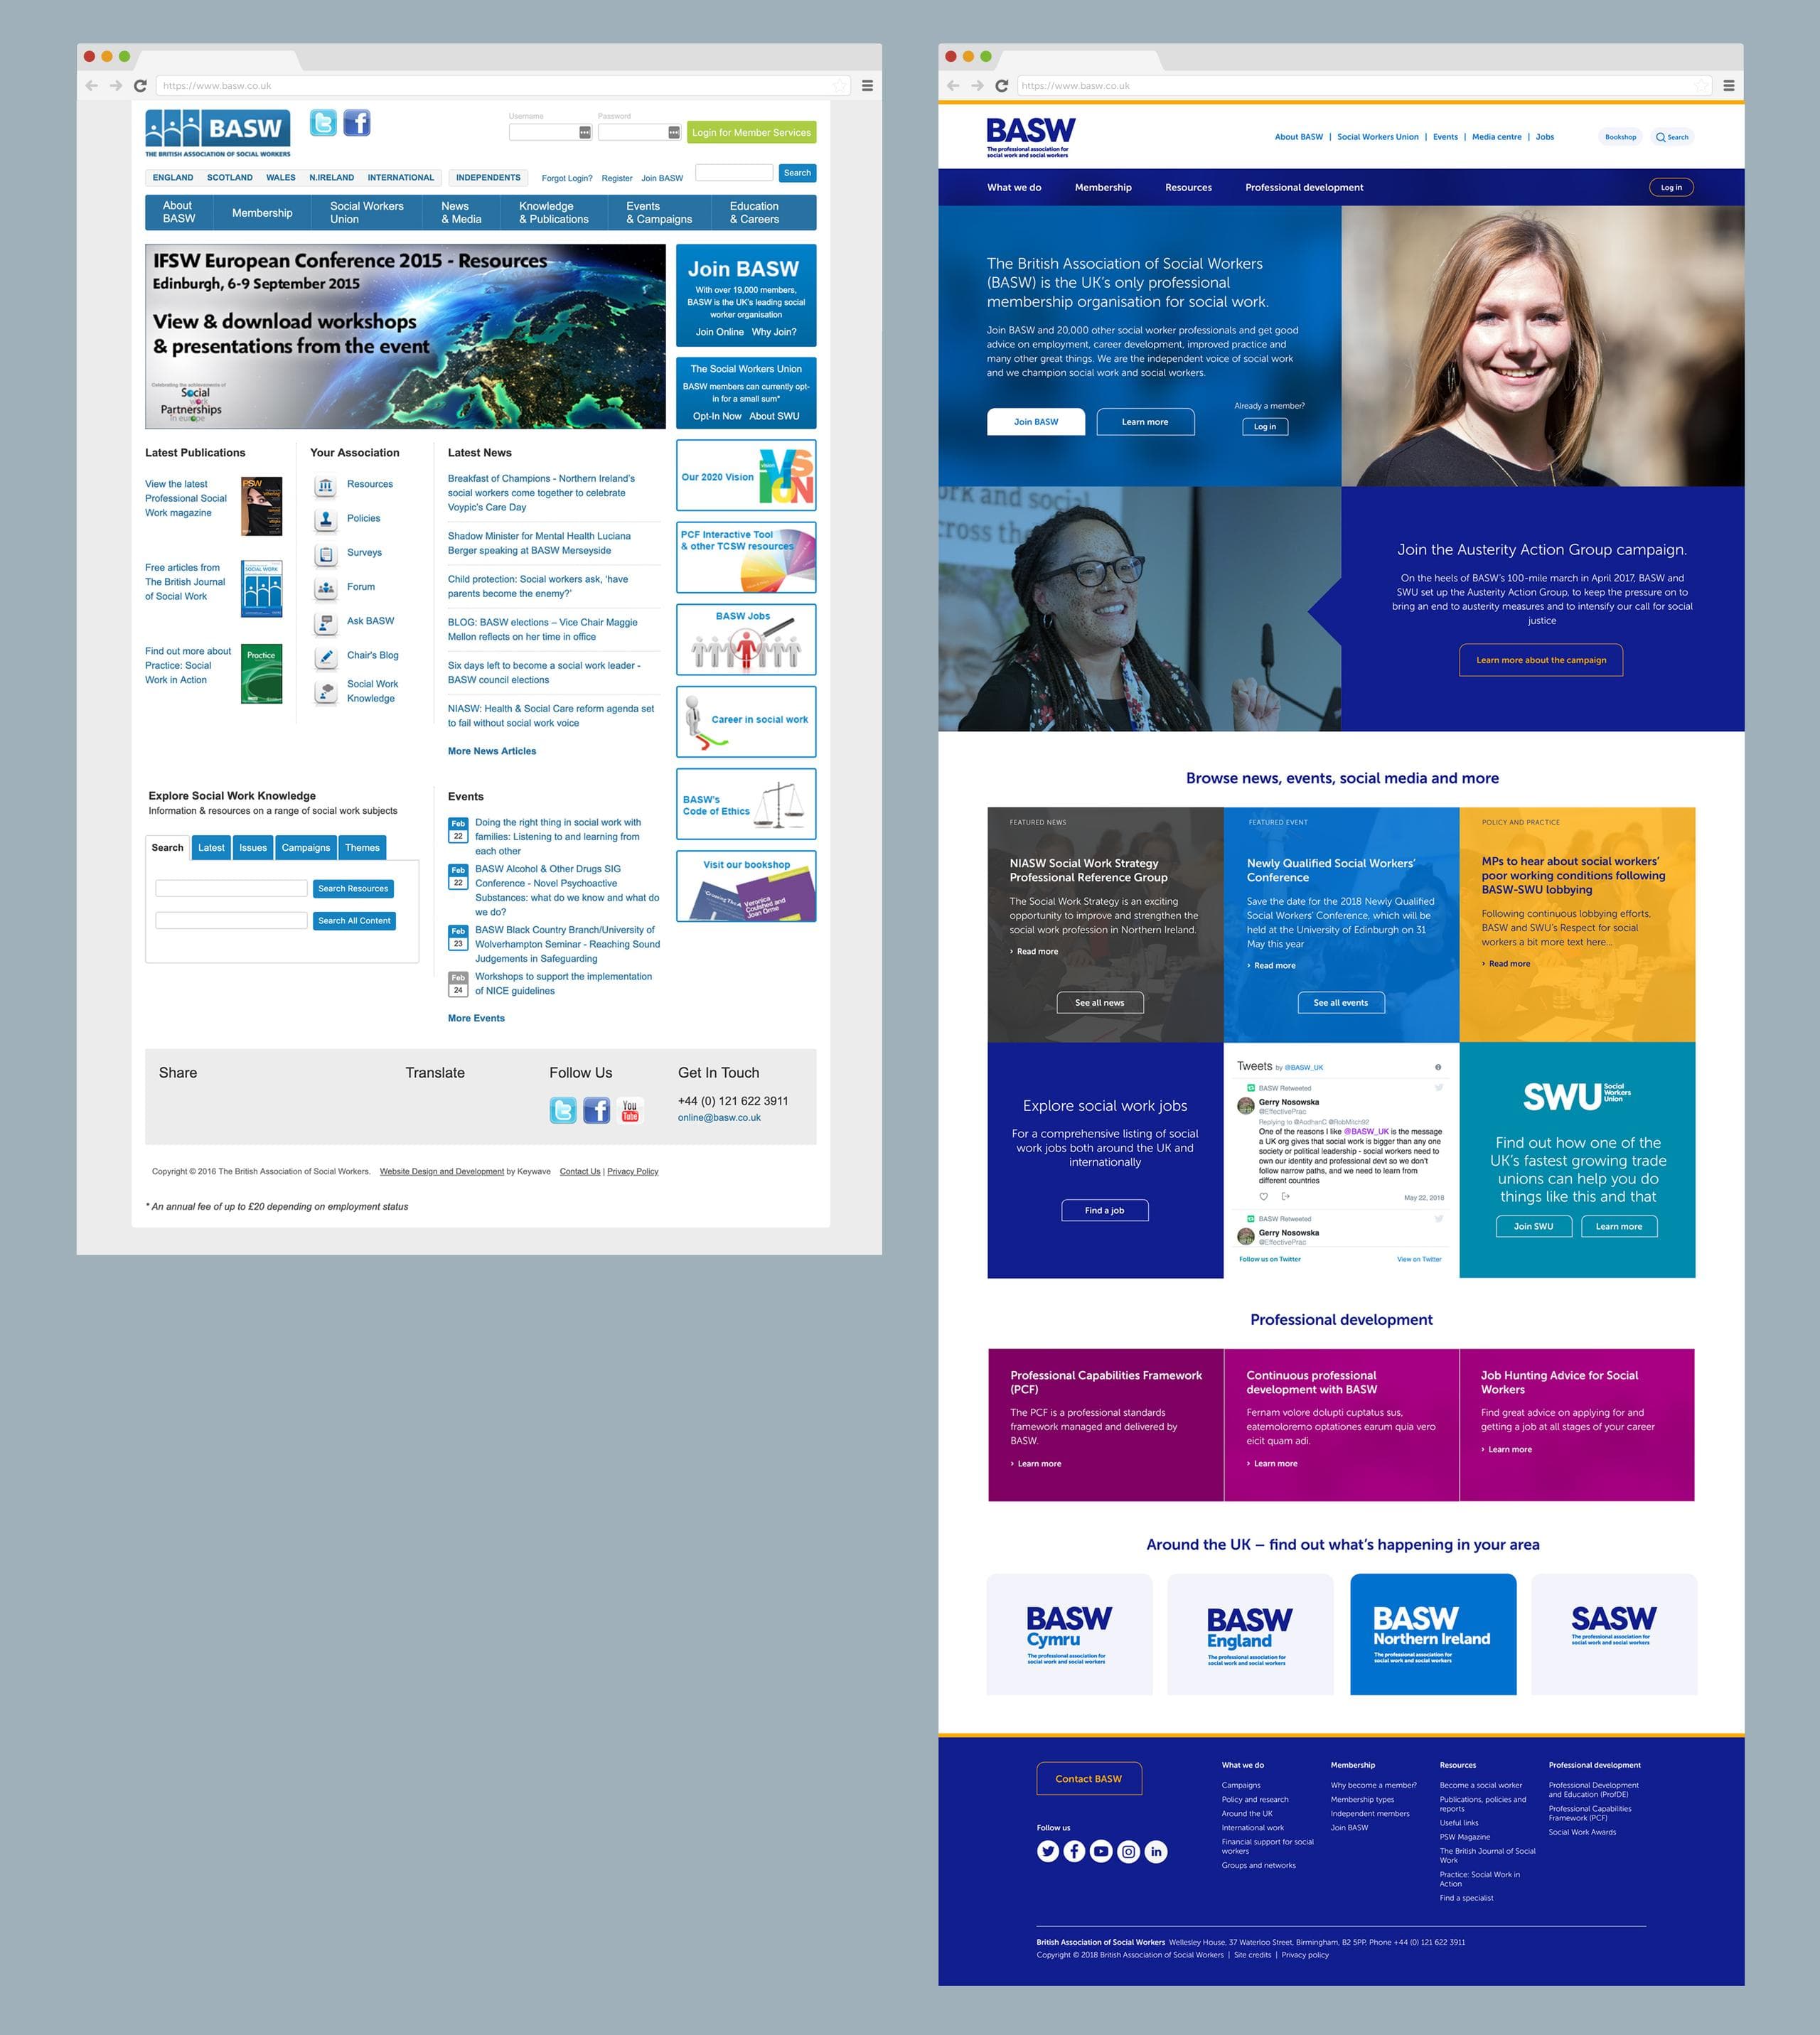 Images of the old BASW homepage and the new BASW homepage